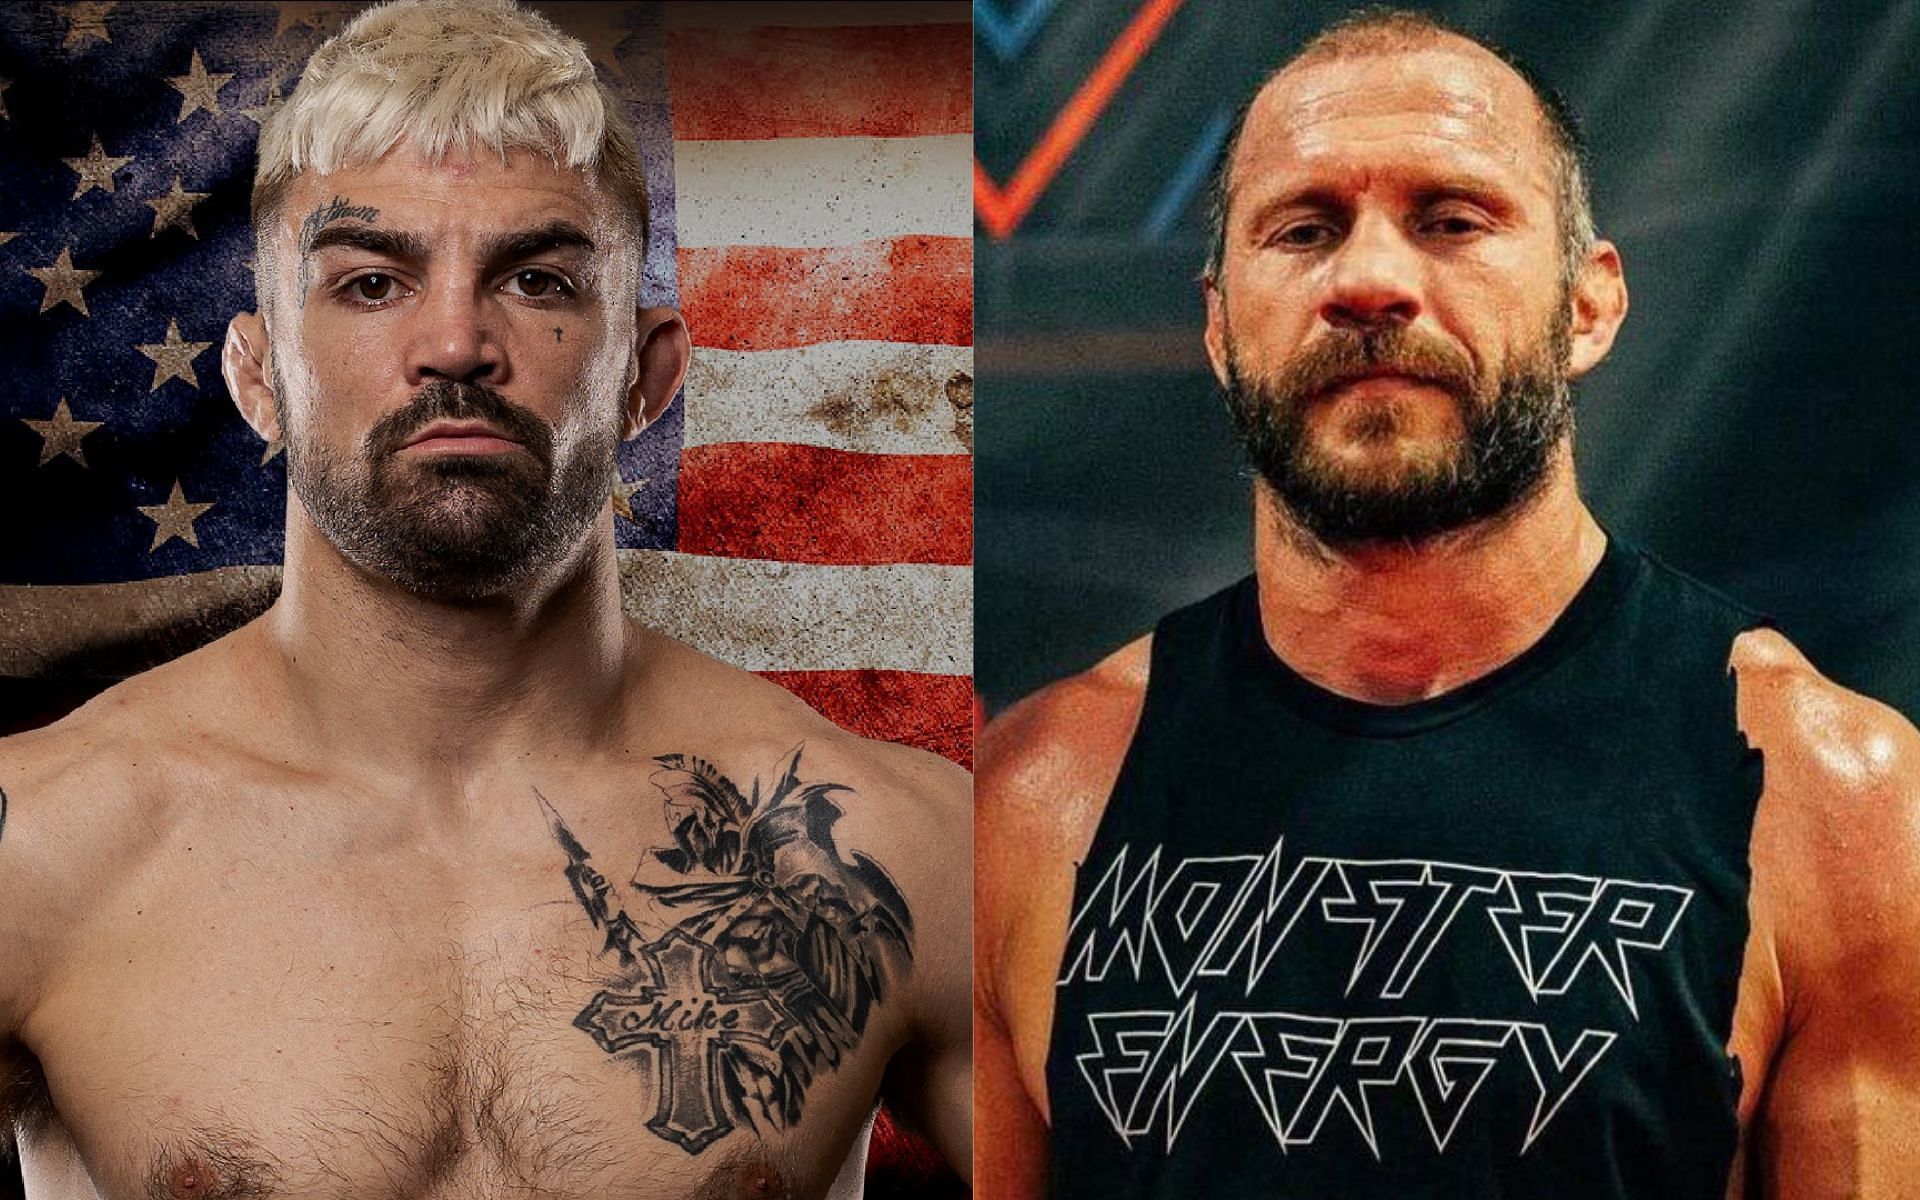 Mike Perry [Left] Donald Corrine [Right] [Images courtesy: @bareknucklefc and @espnmma (Twitter)]